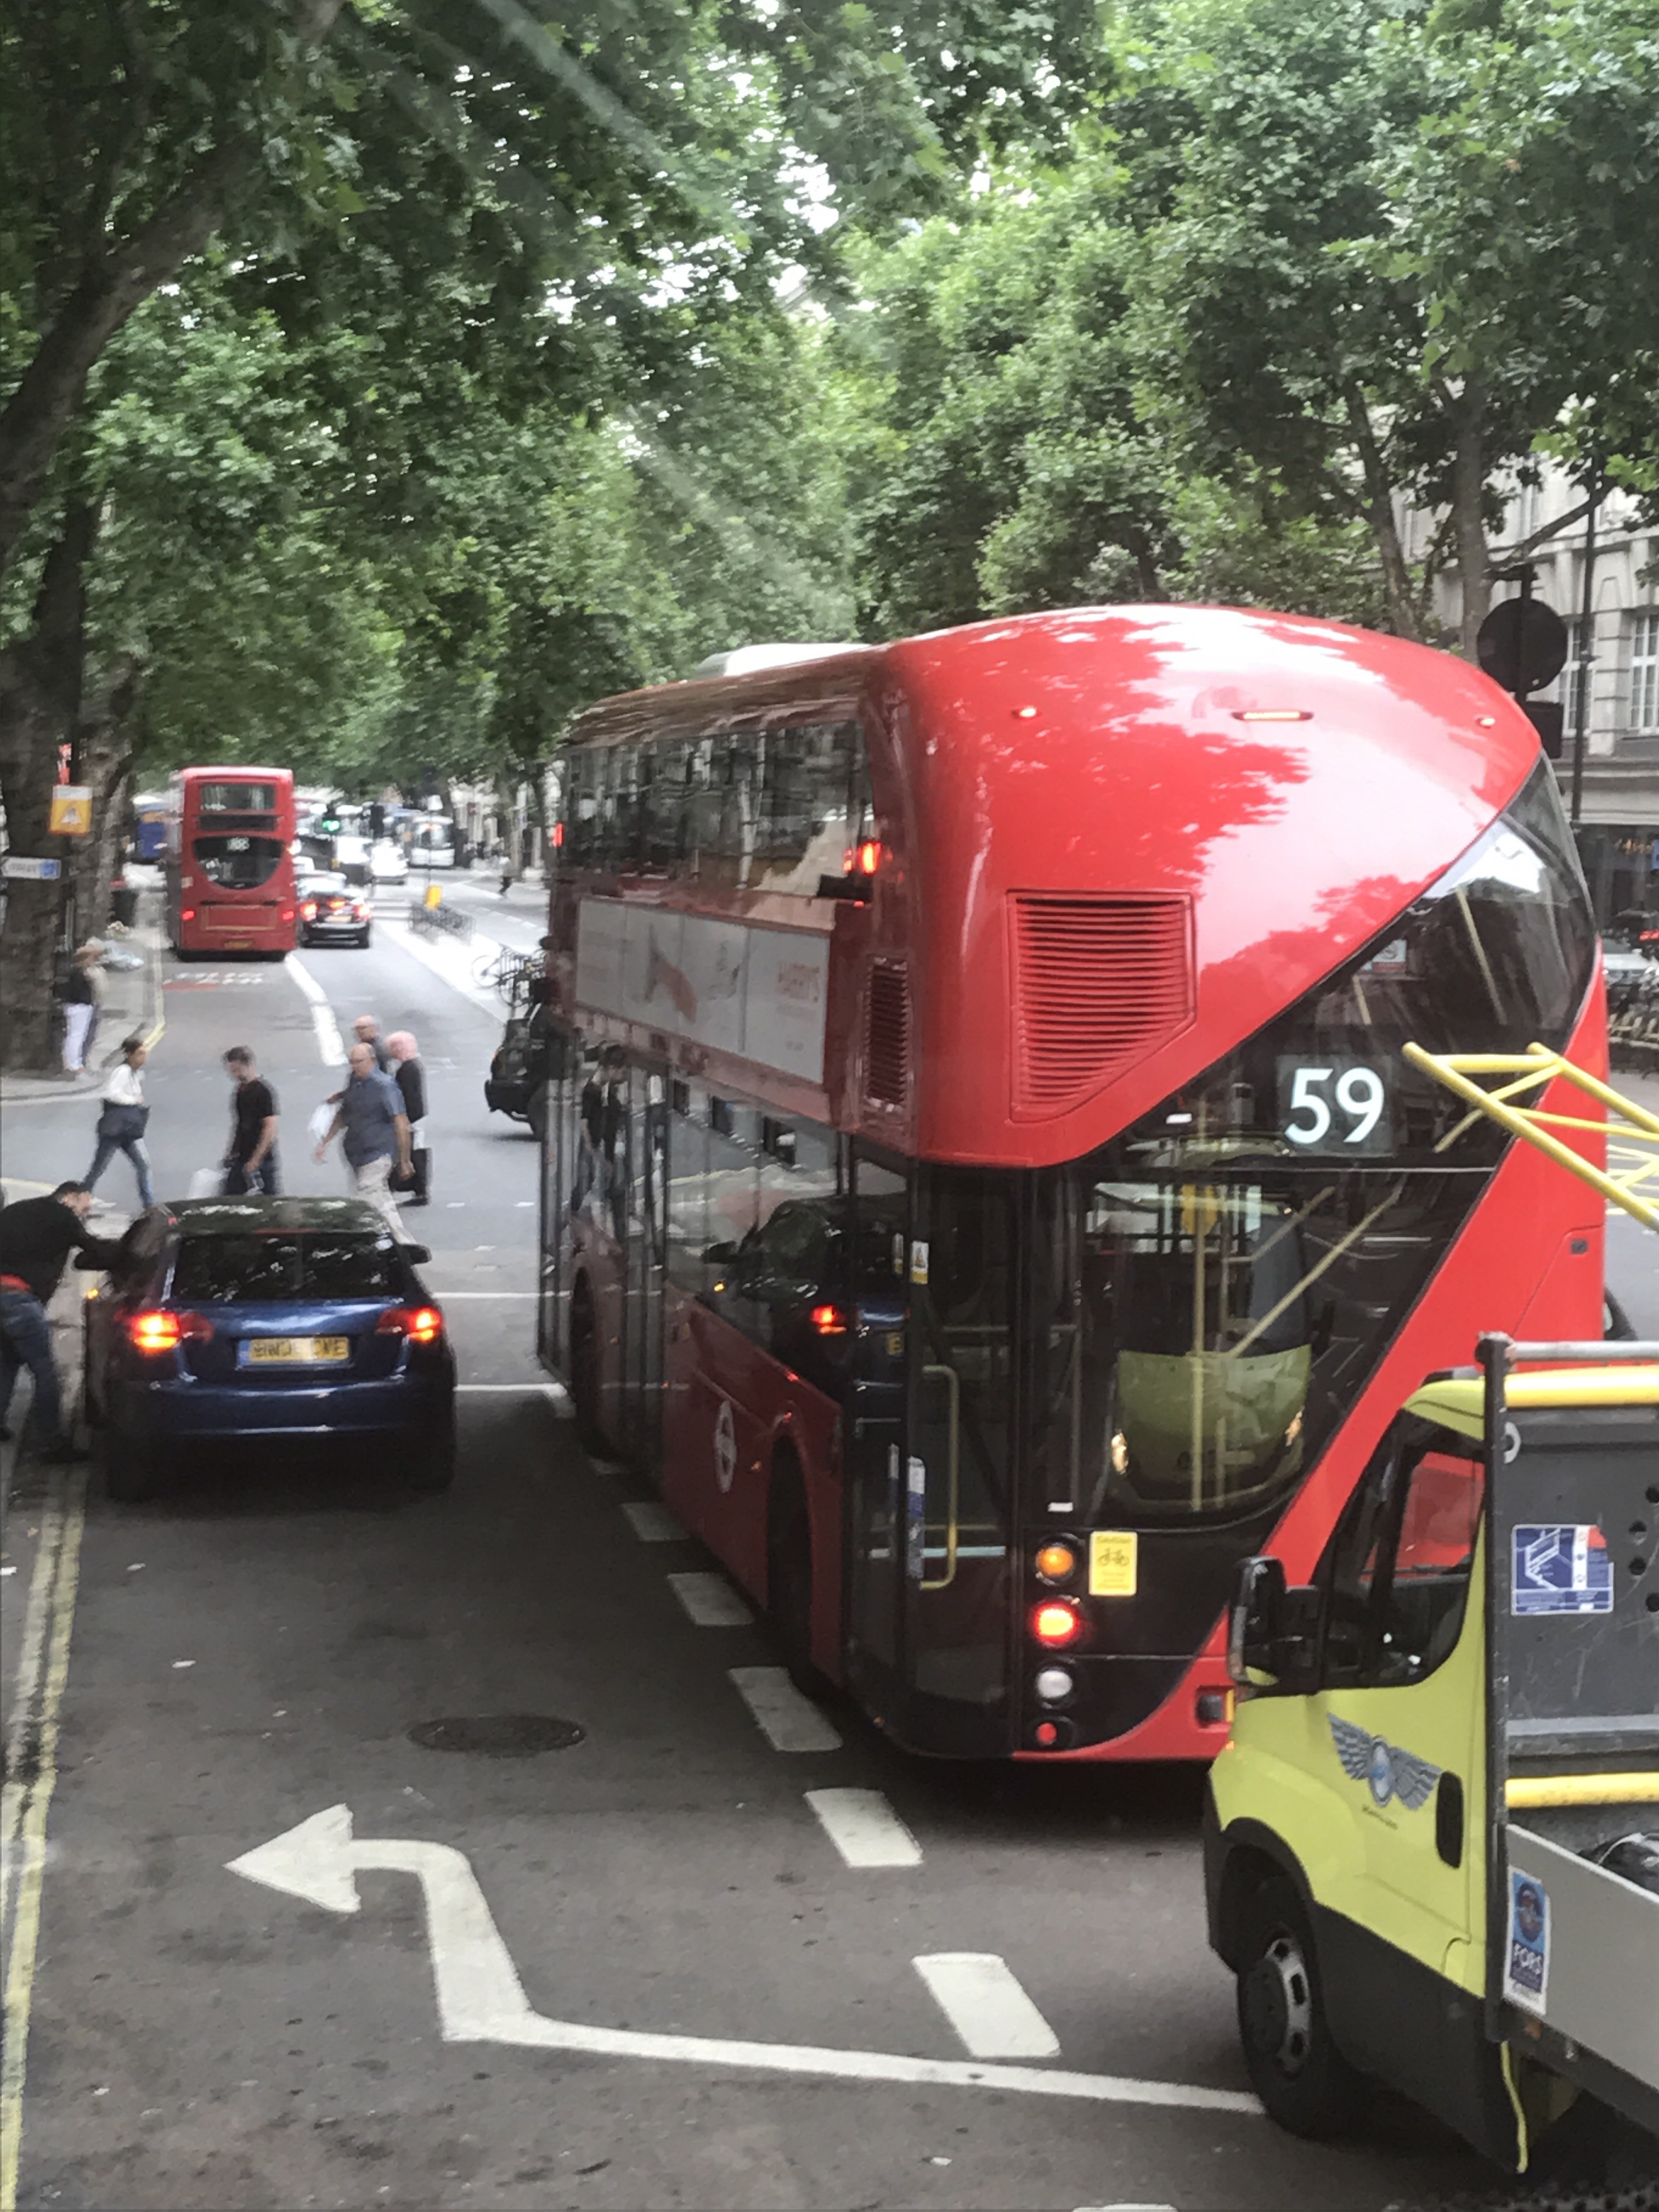 a double decker bus and cars on a street